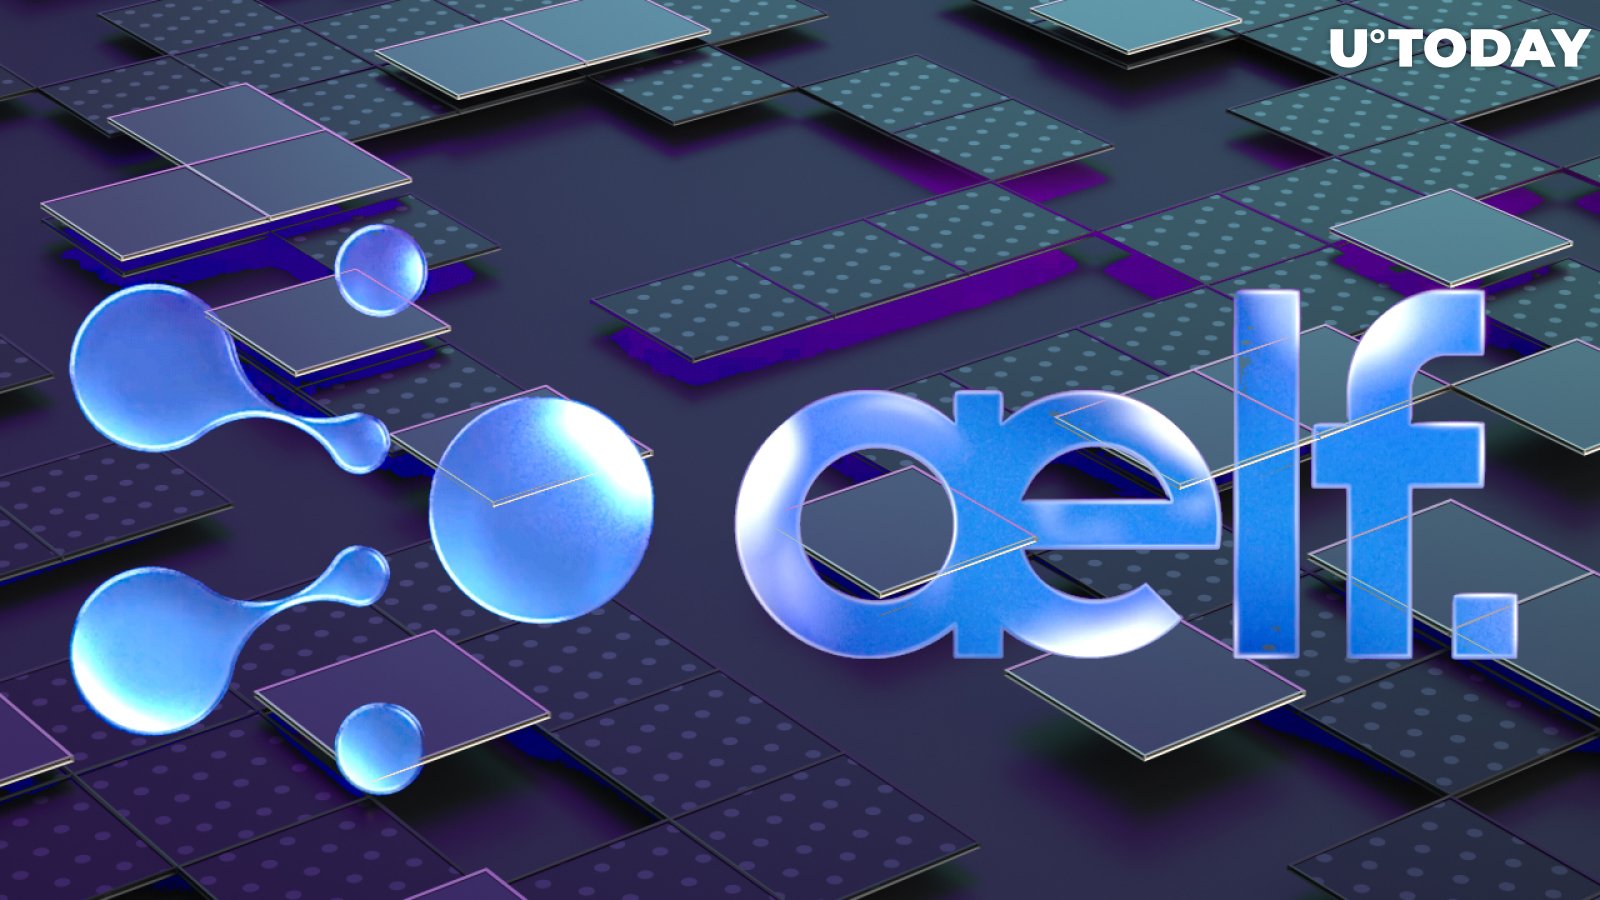 aelf Blockchain Launches Node Election, Shares Details of Staking